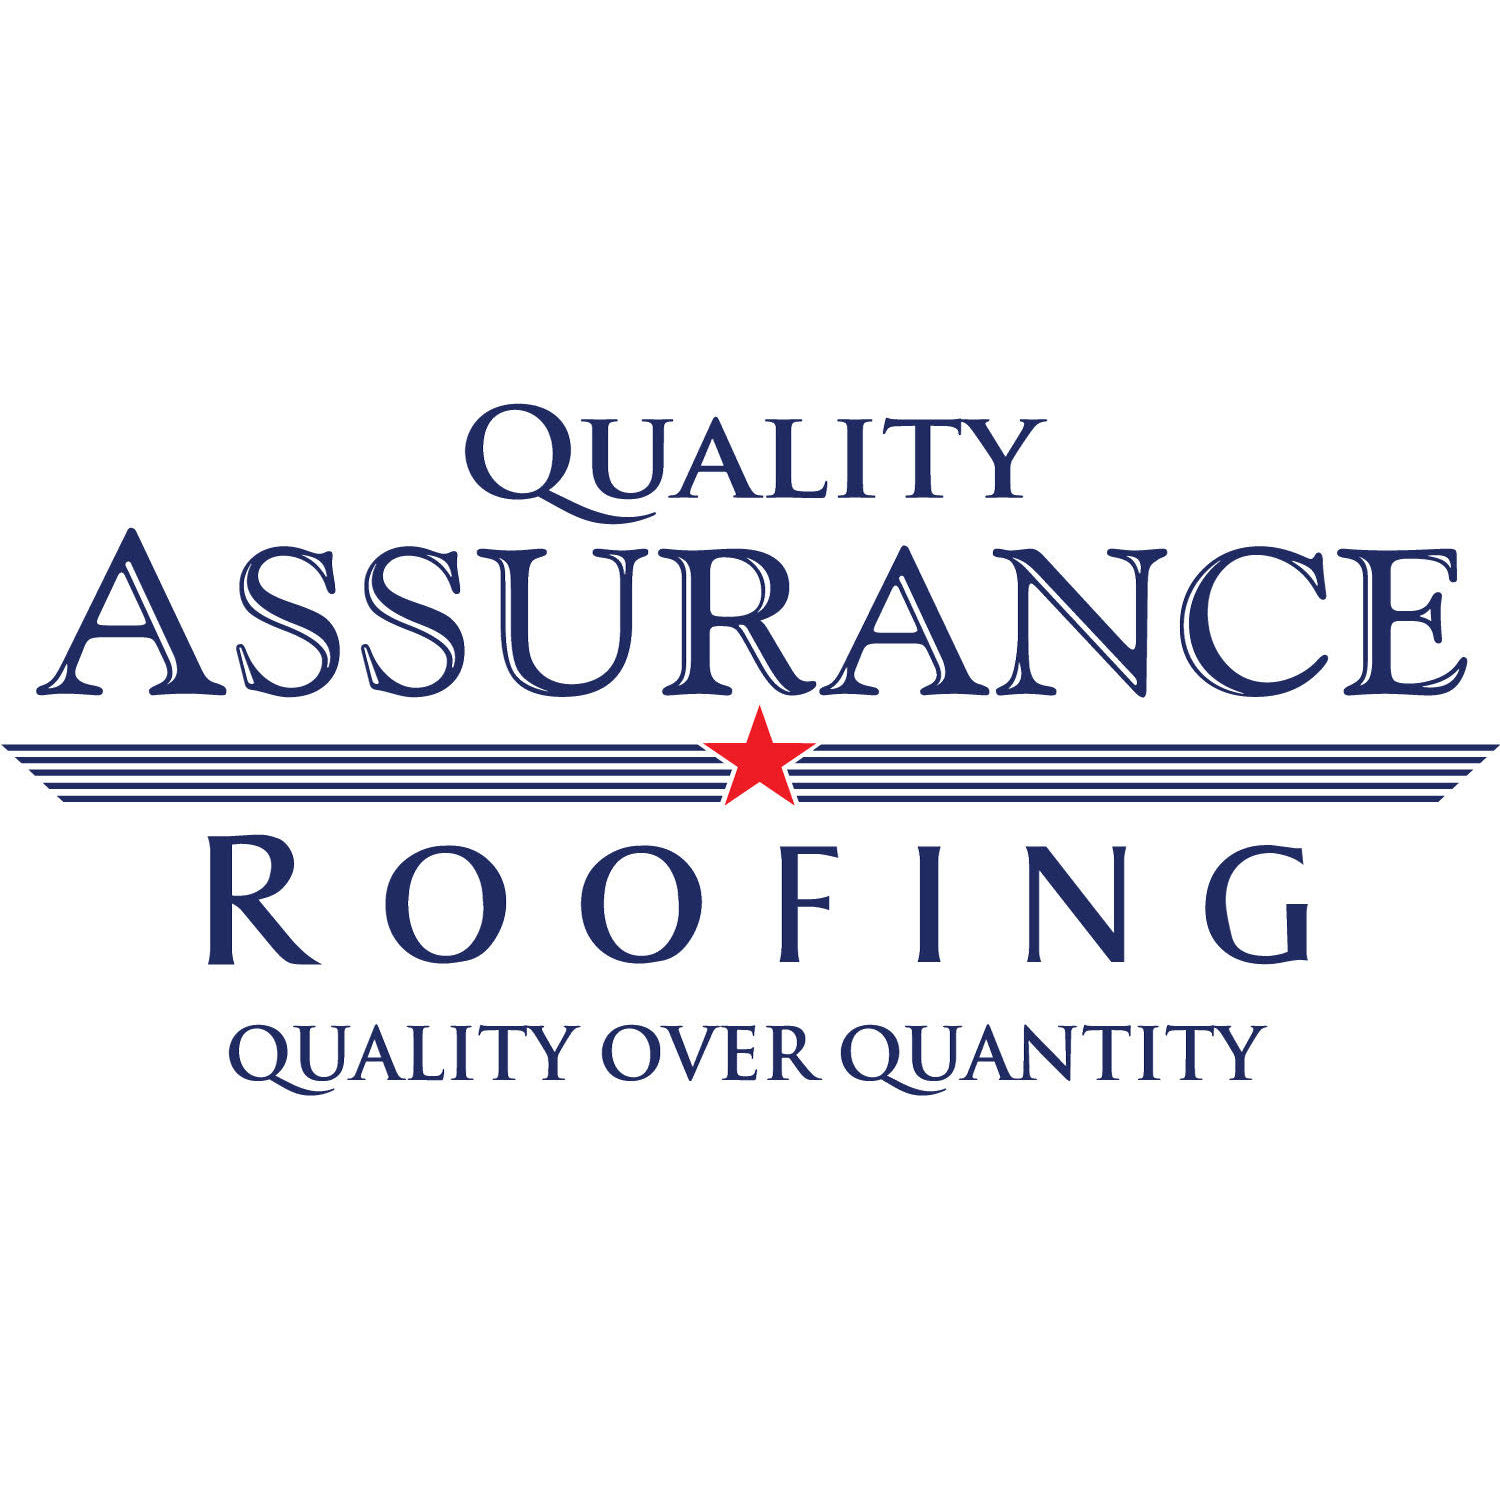 Quality Assurance Roofing - Rogers, AR 72758 - (479)239-5469 | ShowMeLocal.com